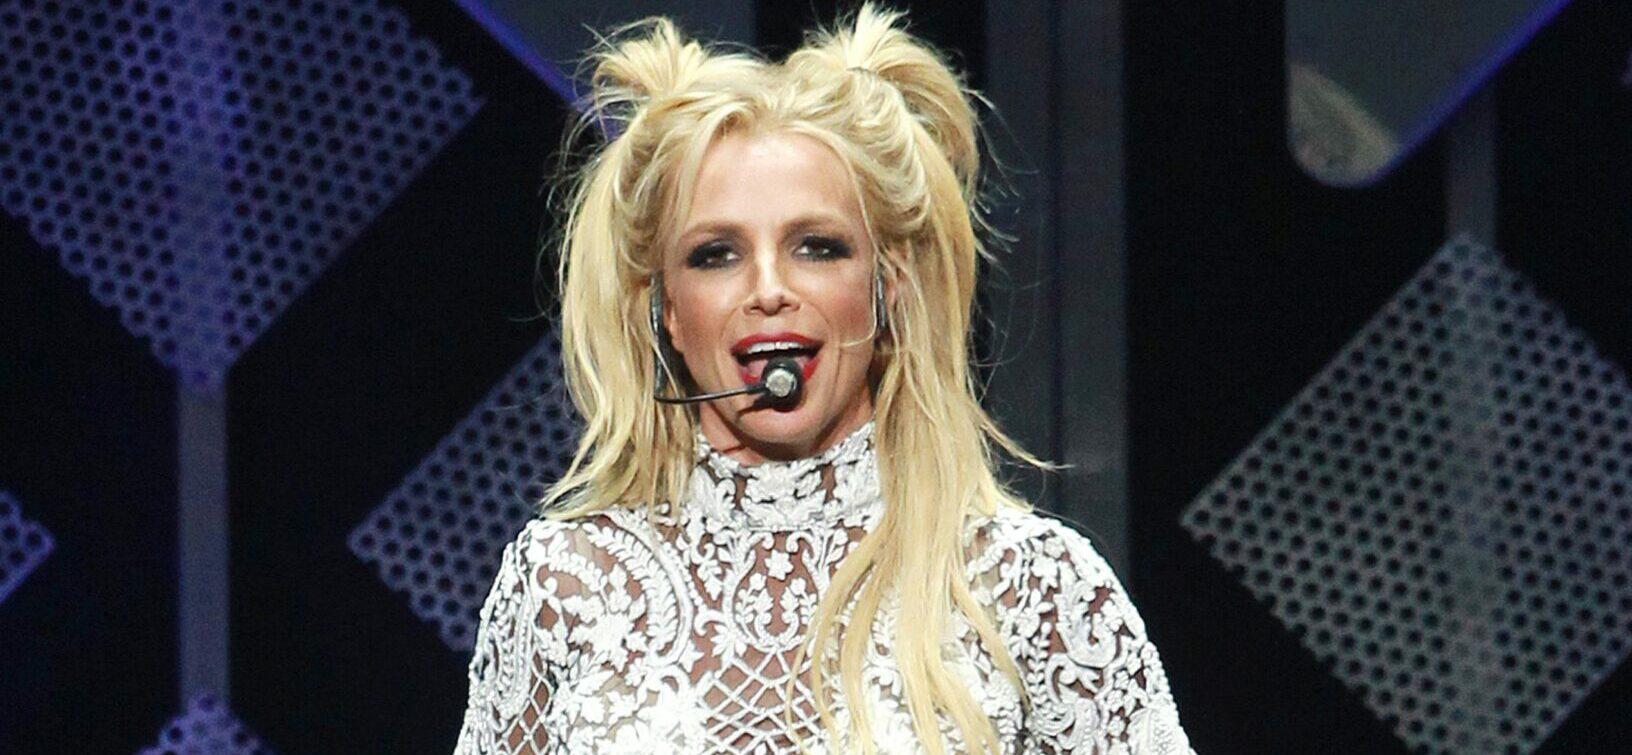 Britney Spears performs on stage during the 102 7 KIIS FM apos s Jingle Ball 2016